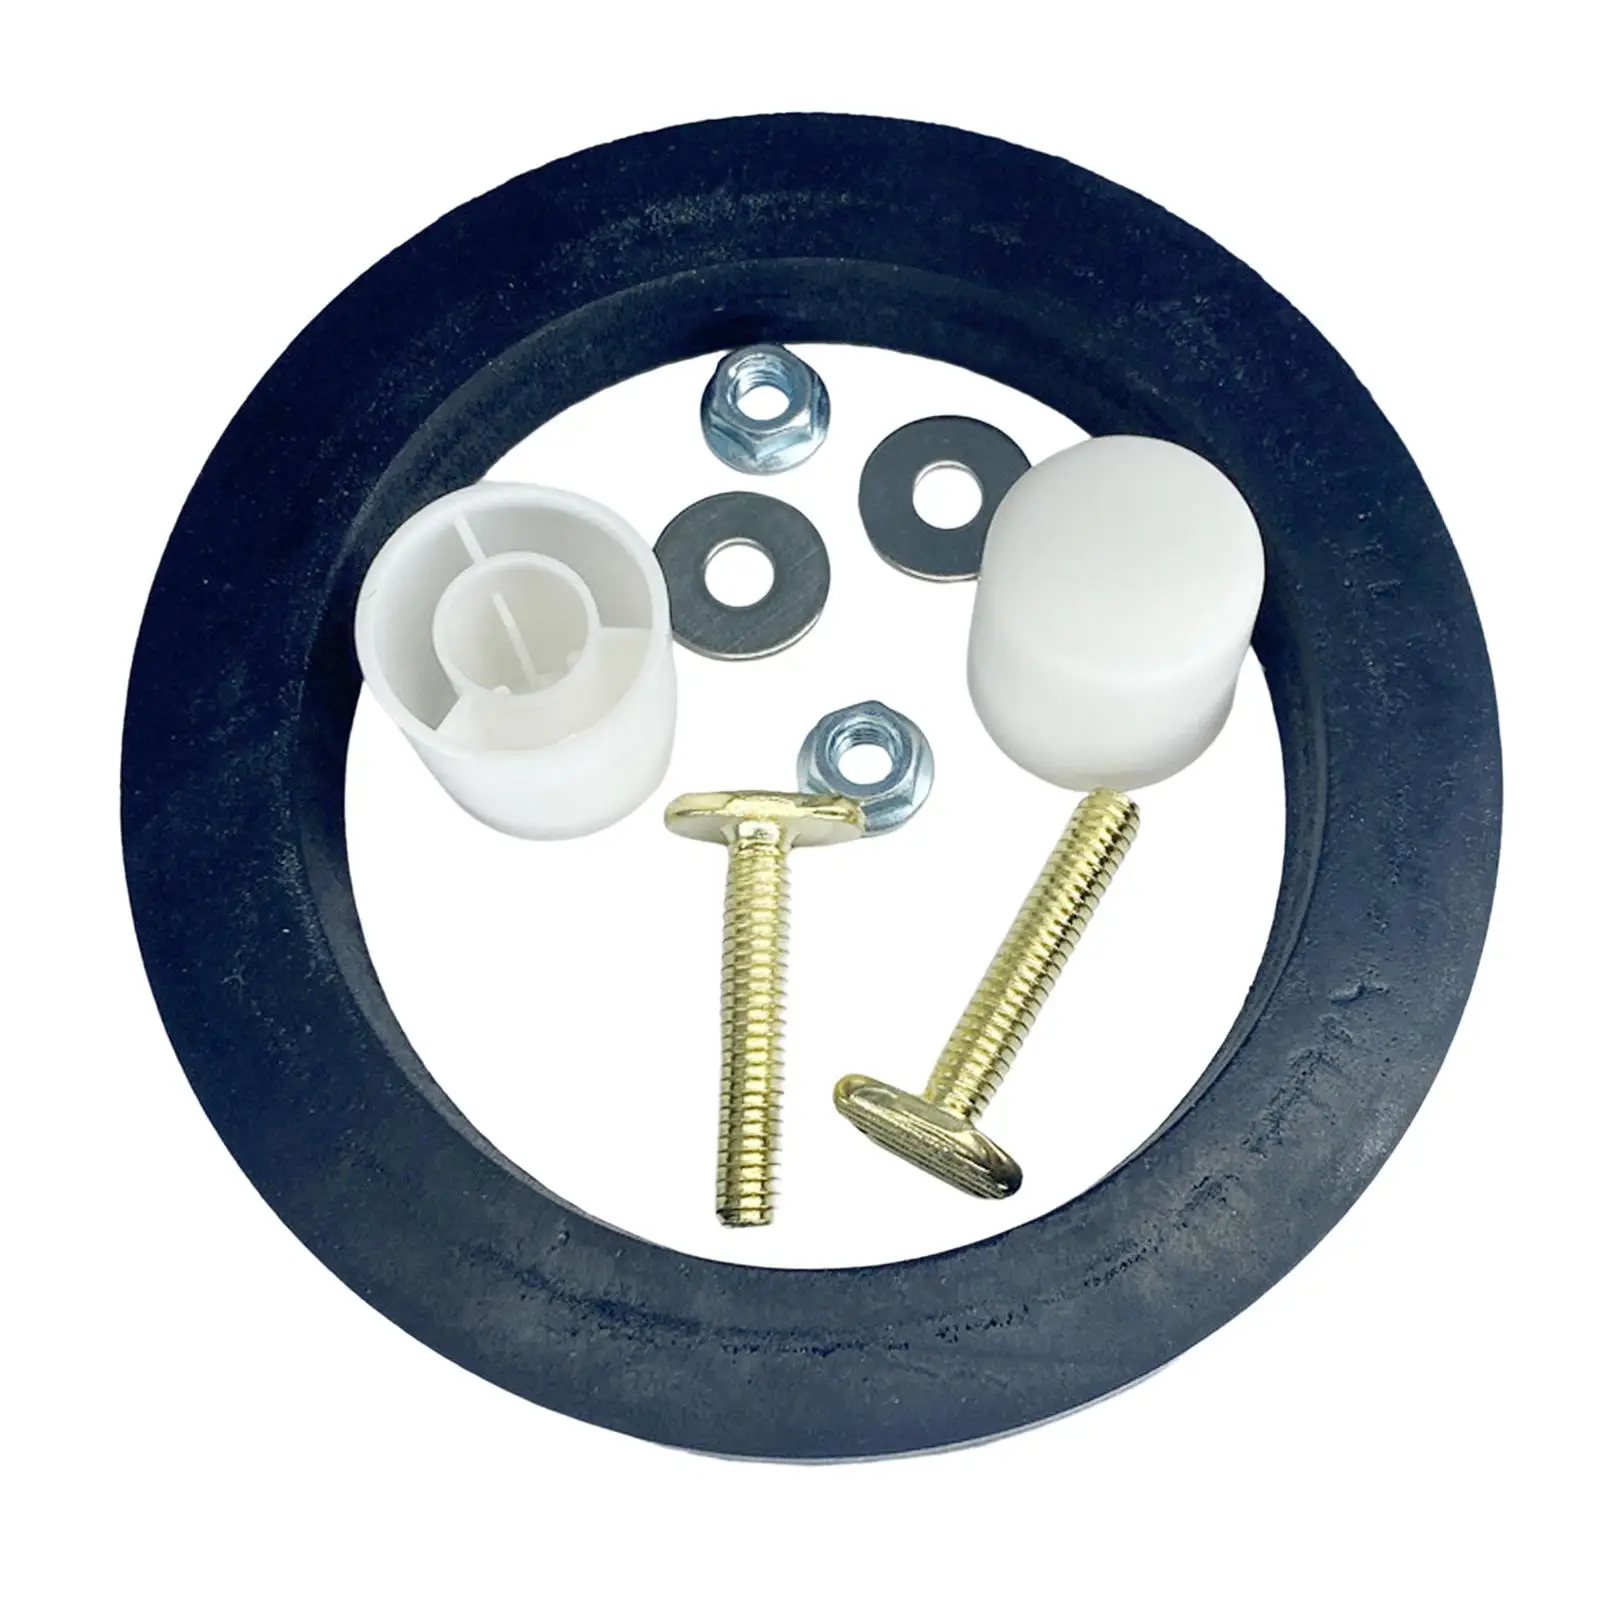 RV Toilet Parts Seal Kit for 300, 310, 320 Series Accessory Lightweight